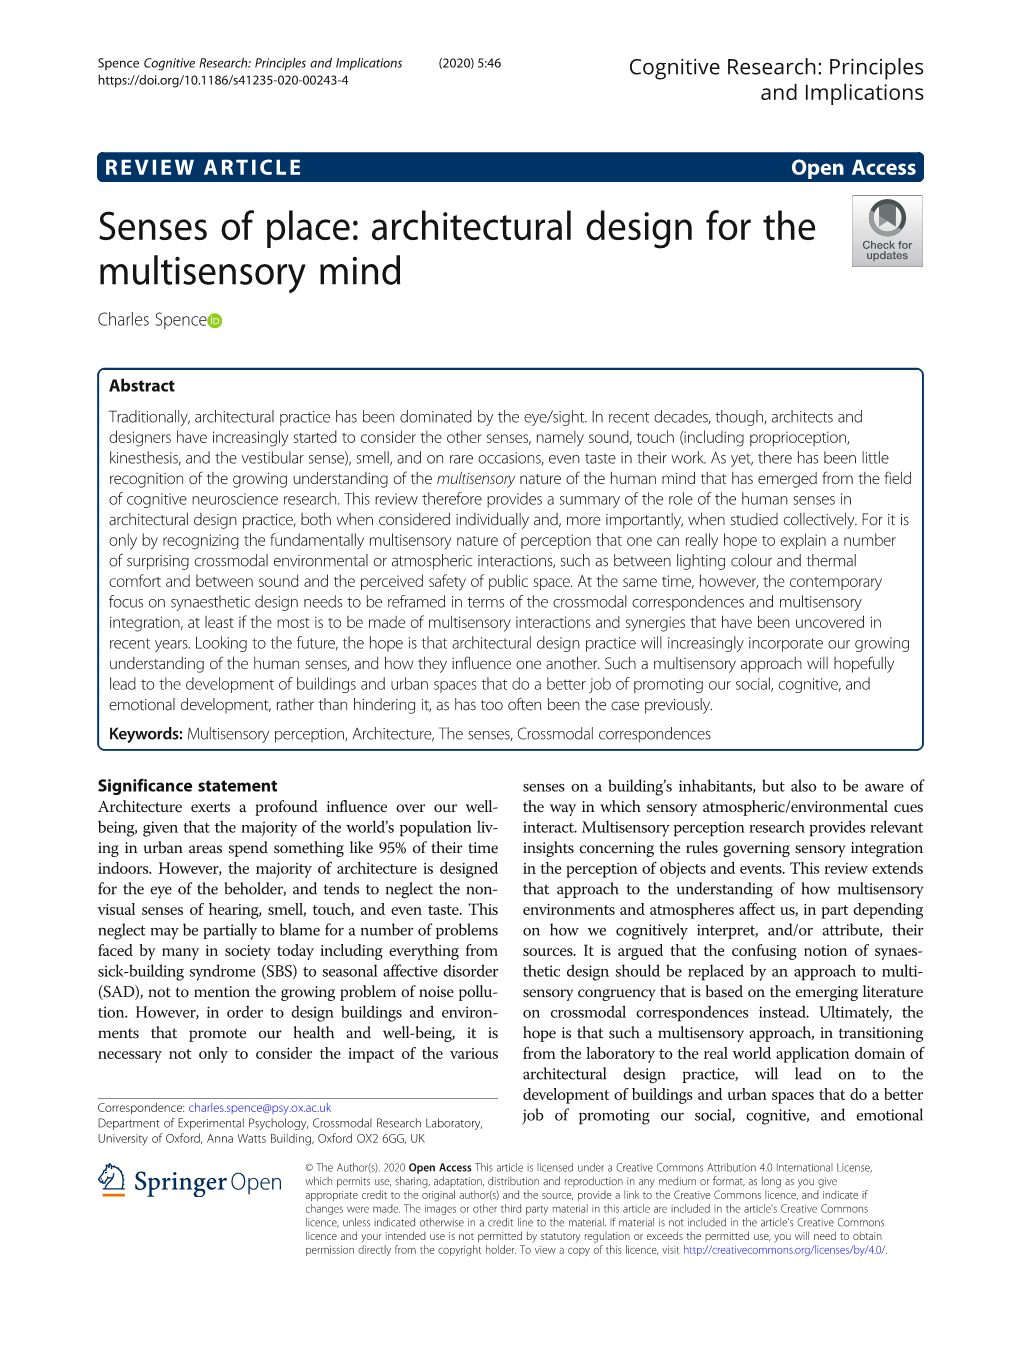 Senses of Place: Architectural Design for the Multisensory Mind Charles Spence